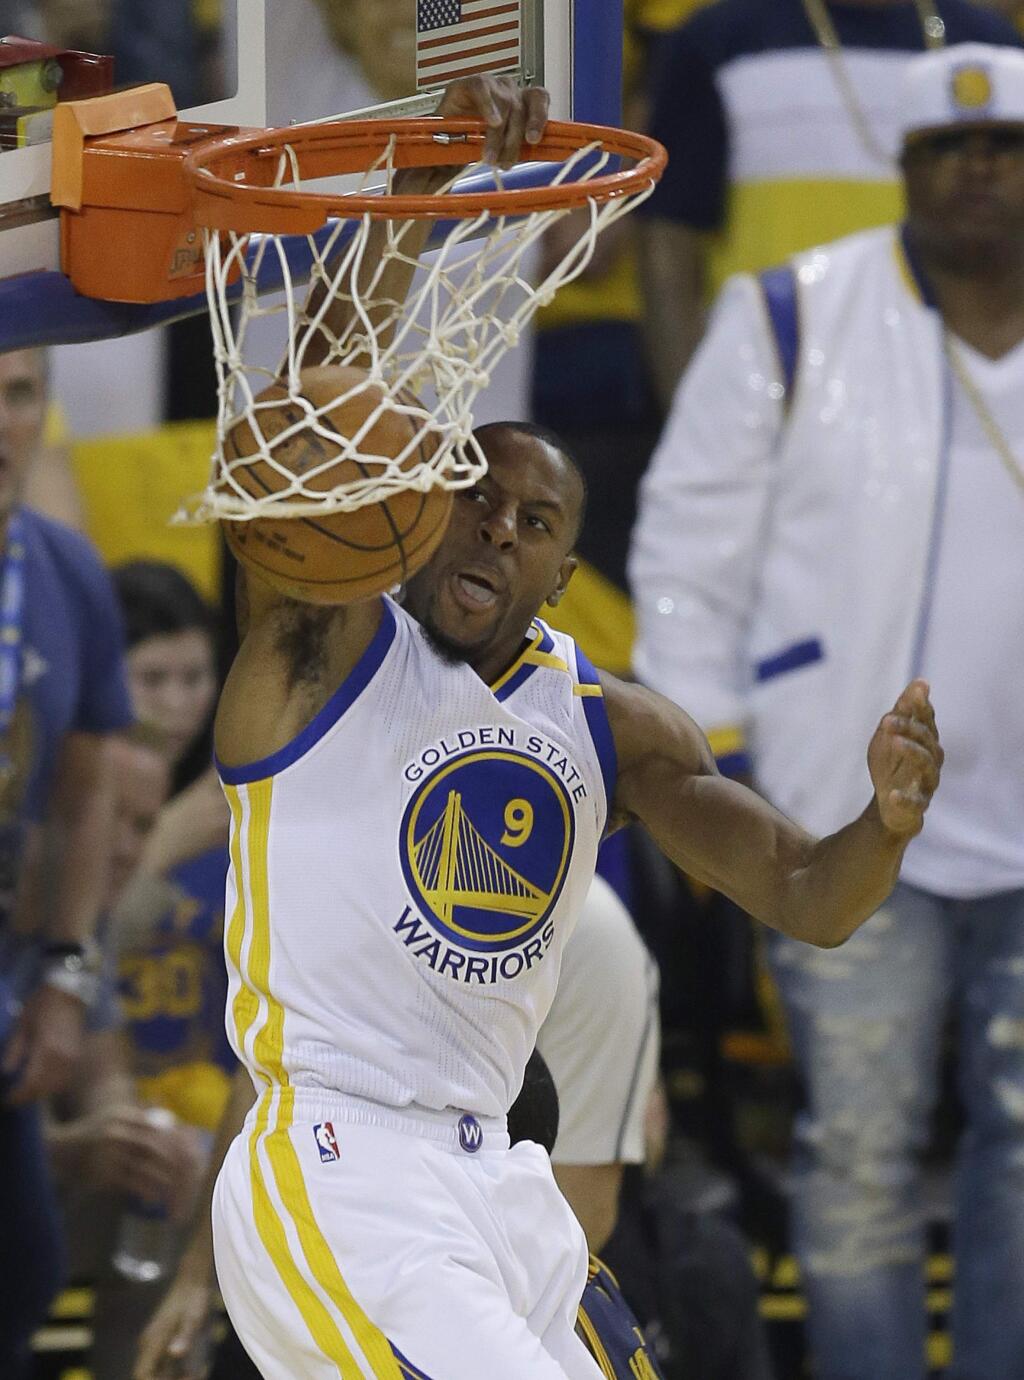 In this June 1, 2017, file photo, Golden State Warriors forward Andre Iguodala dunks against the Cleveland Cavaliers during the first half of Game 1 of the NBA Finals in Oakland. (AP Photo/Ben Margot, File)